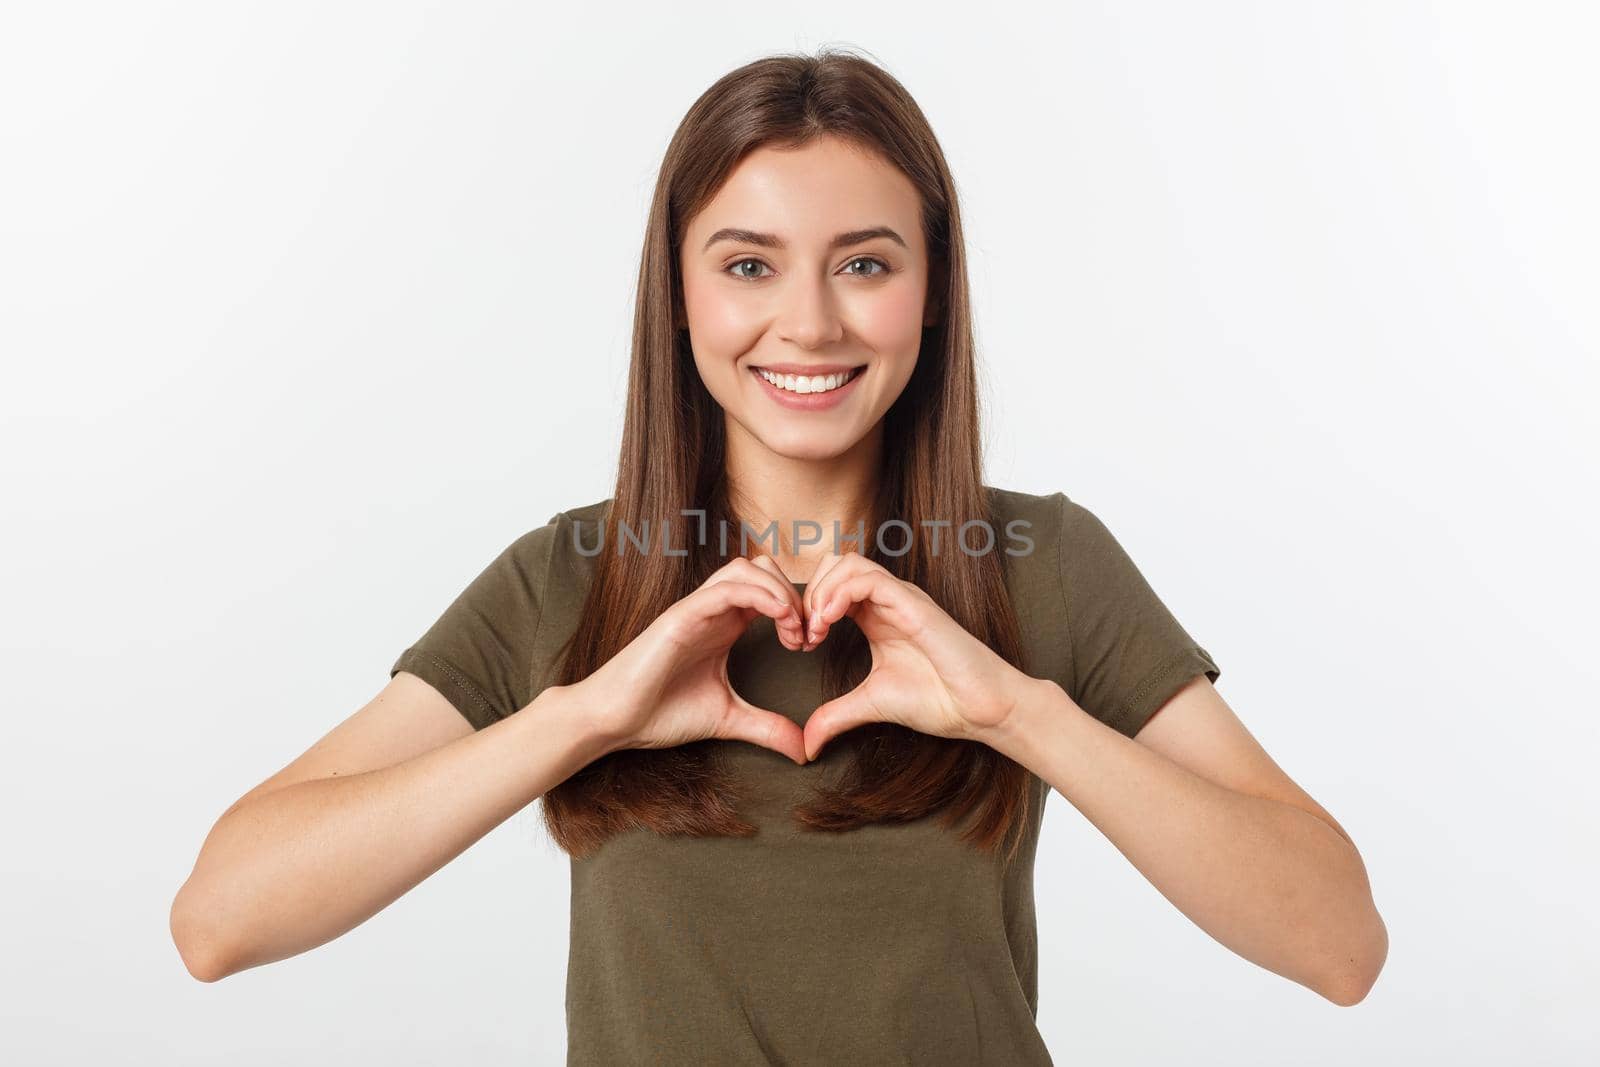 Smiling teenager girl making heart shape with her hands isolated on white